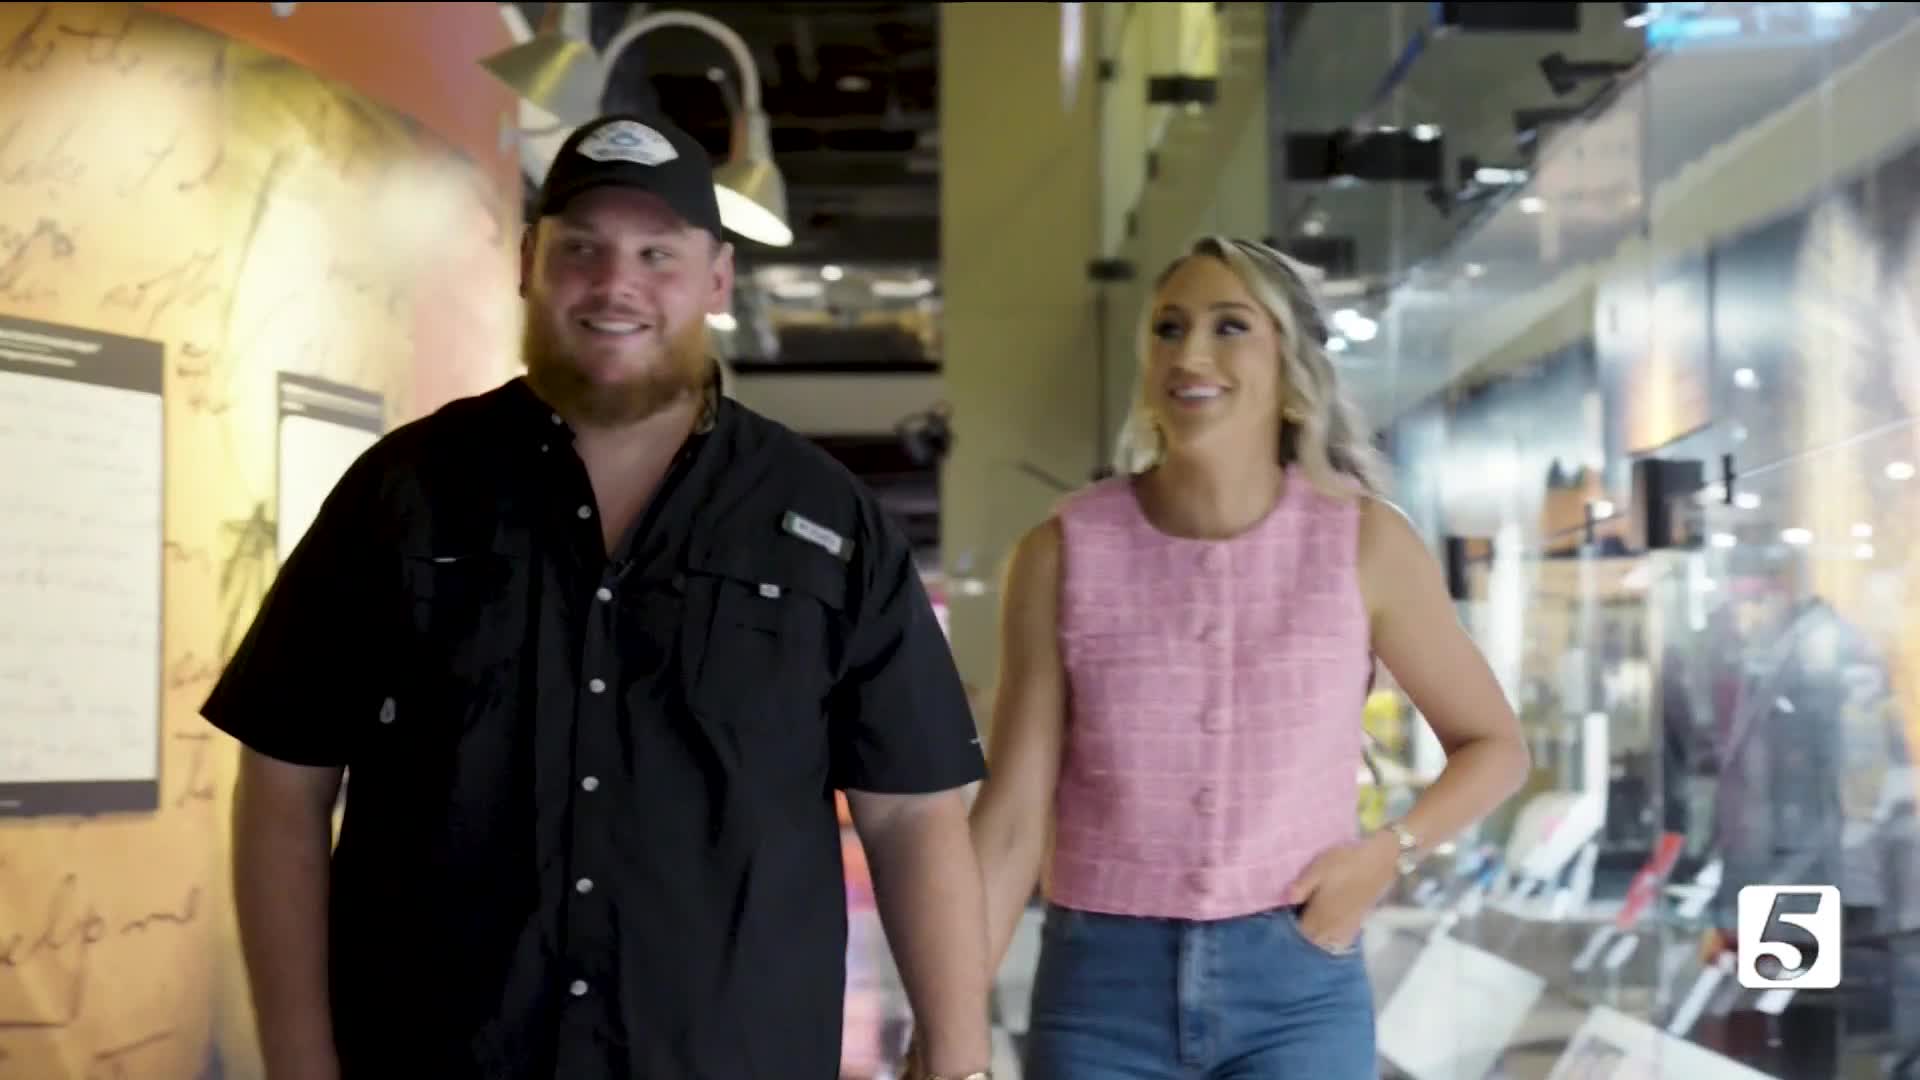 Check out the new Luke Combs exhibit at the Country Music Hall of Fame